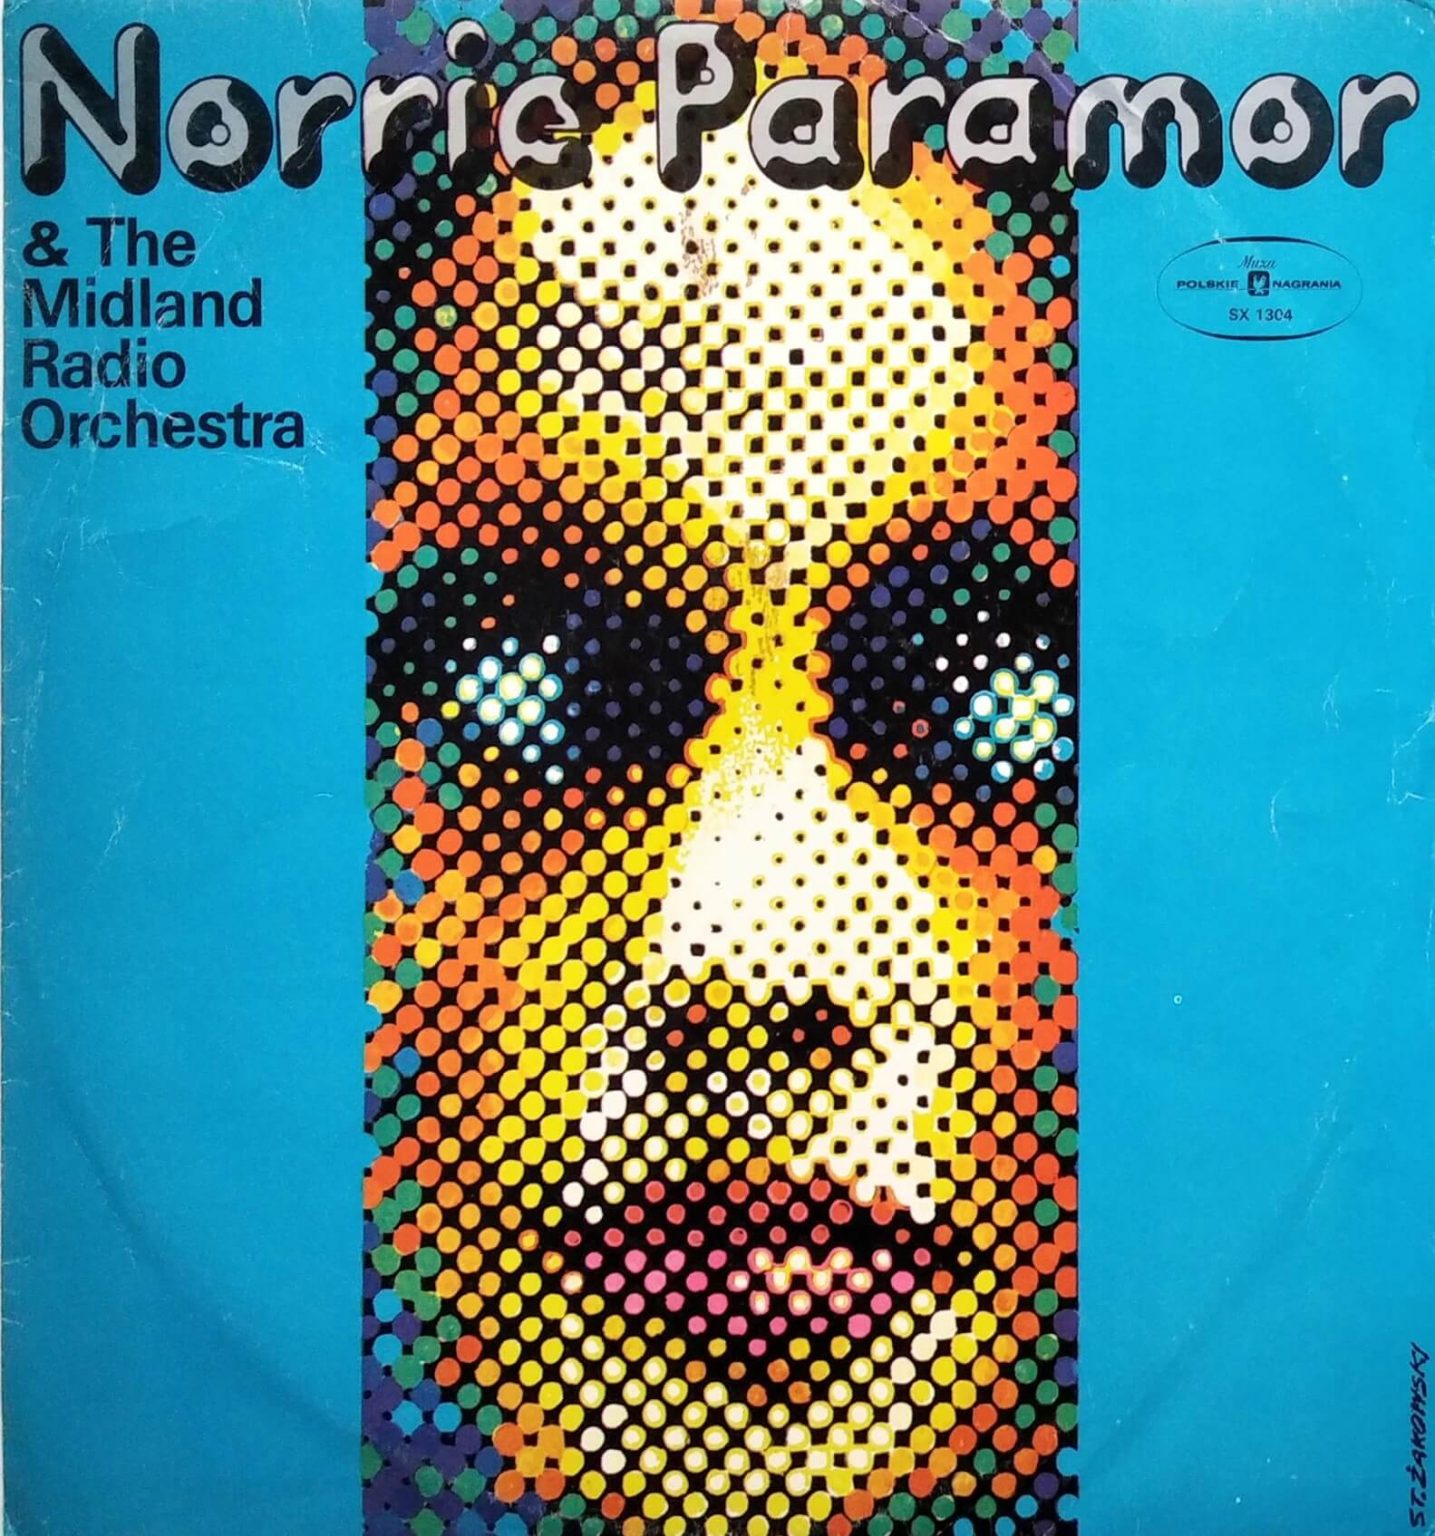 Norrie Paramor & The Midland Radio Orchestra – Norrie Paramor & The Midland Radio Orchestra [LP Vinyl] (NM/NM)